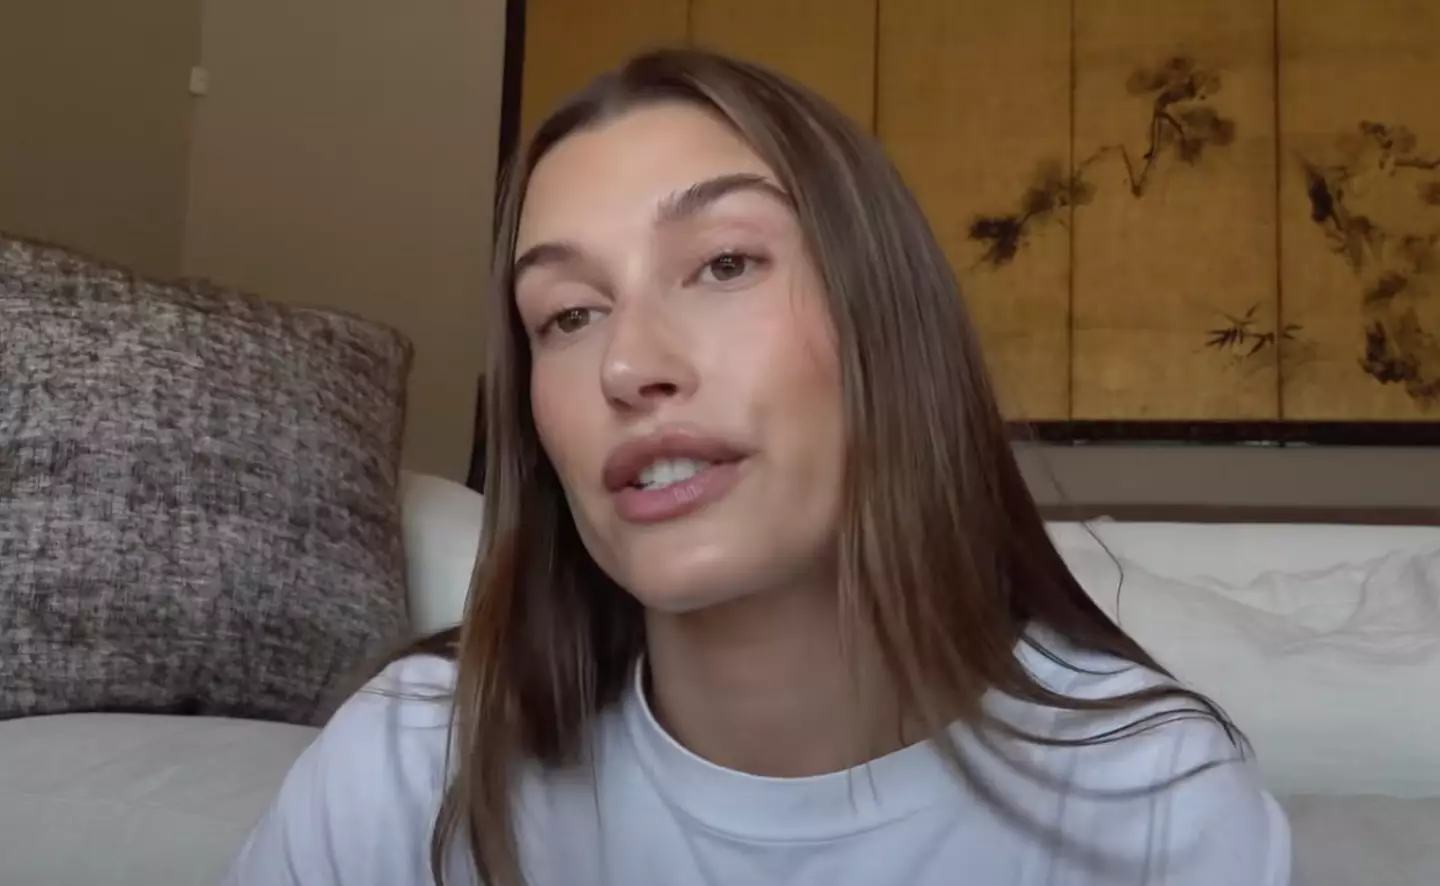 Hailey Bieber has opened up about the blood clot and 'stroke-like' symptoms she suffered from last month.